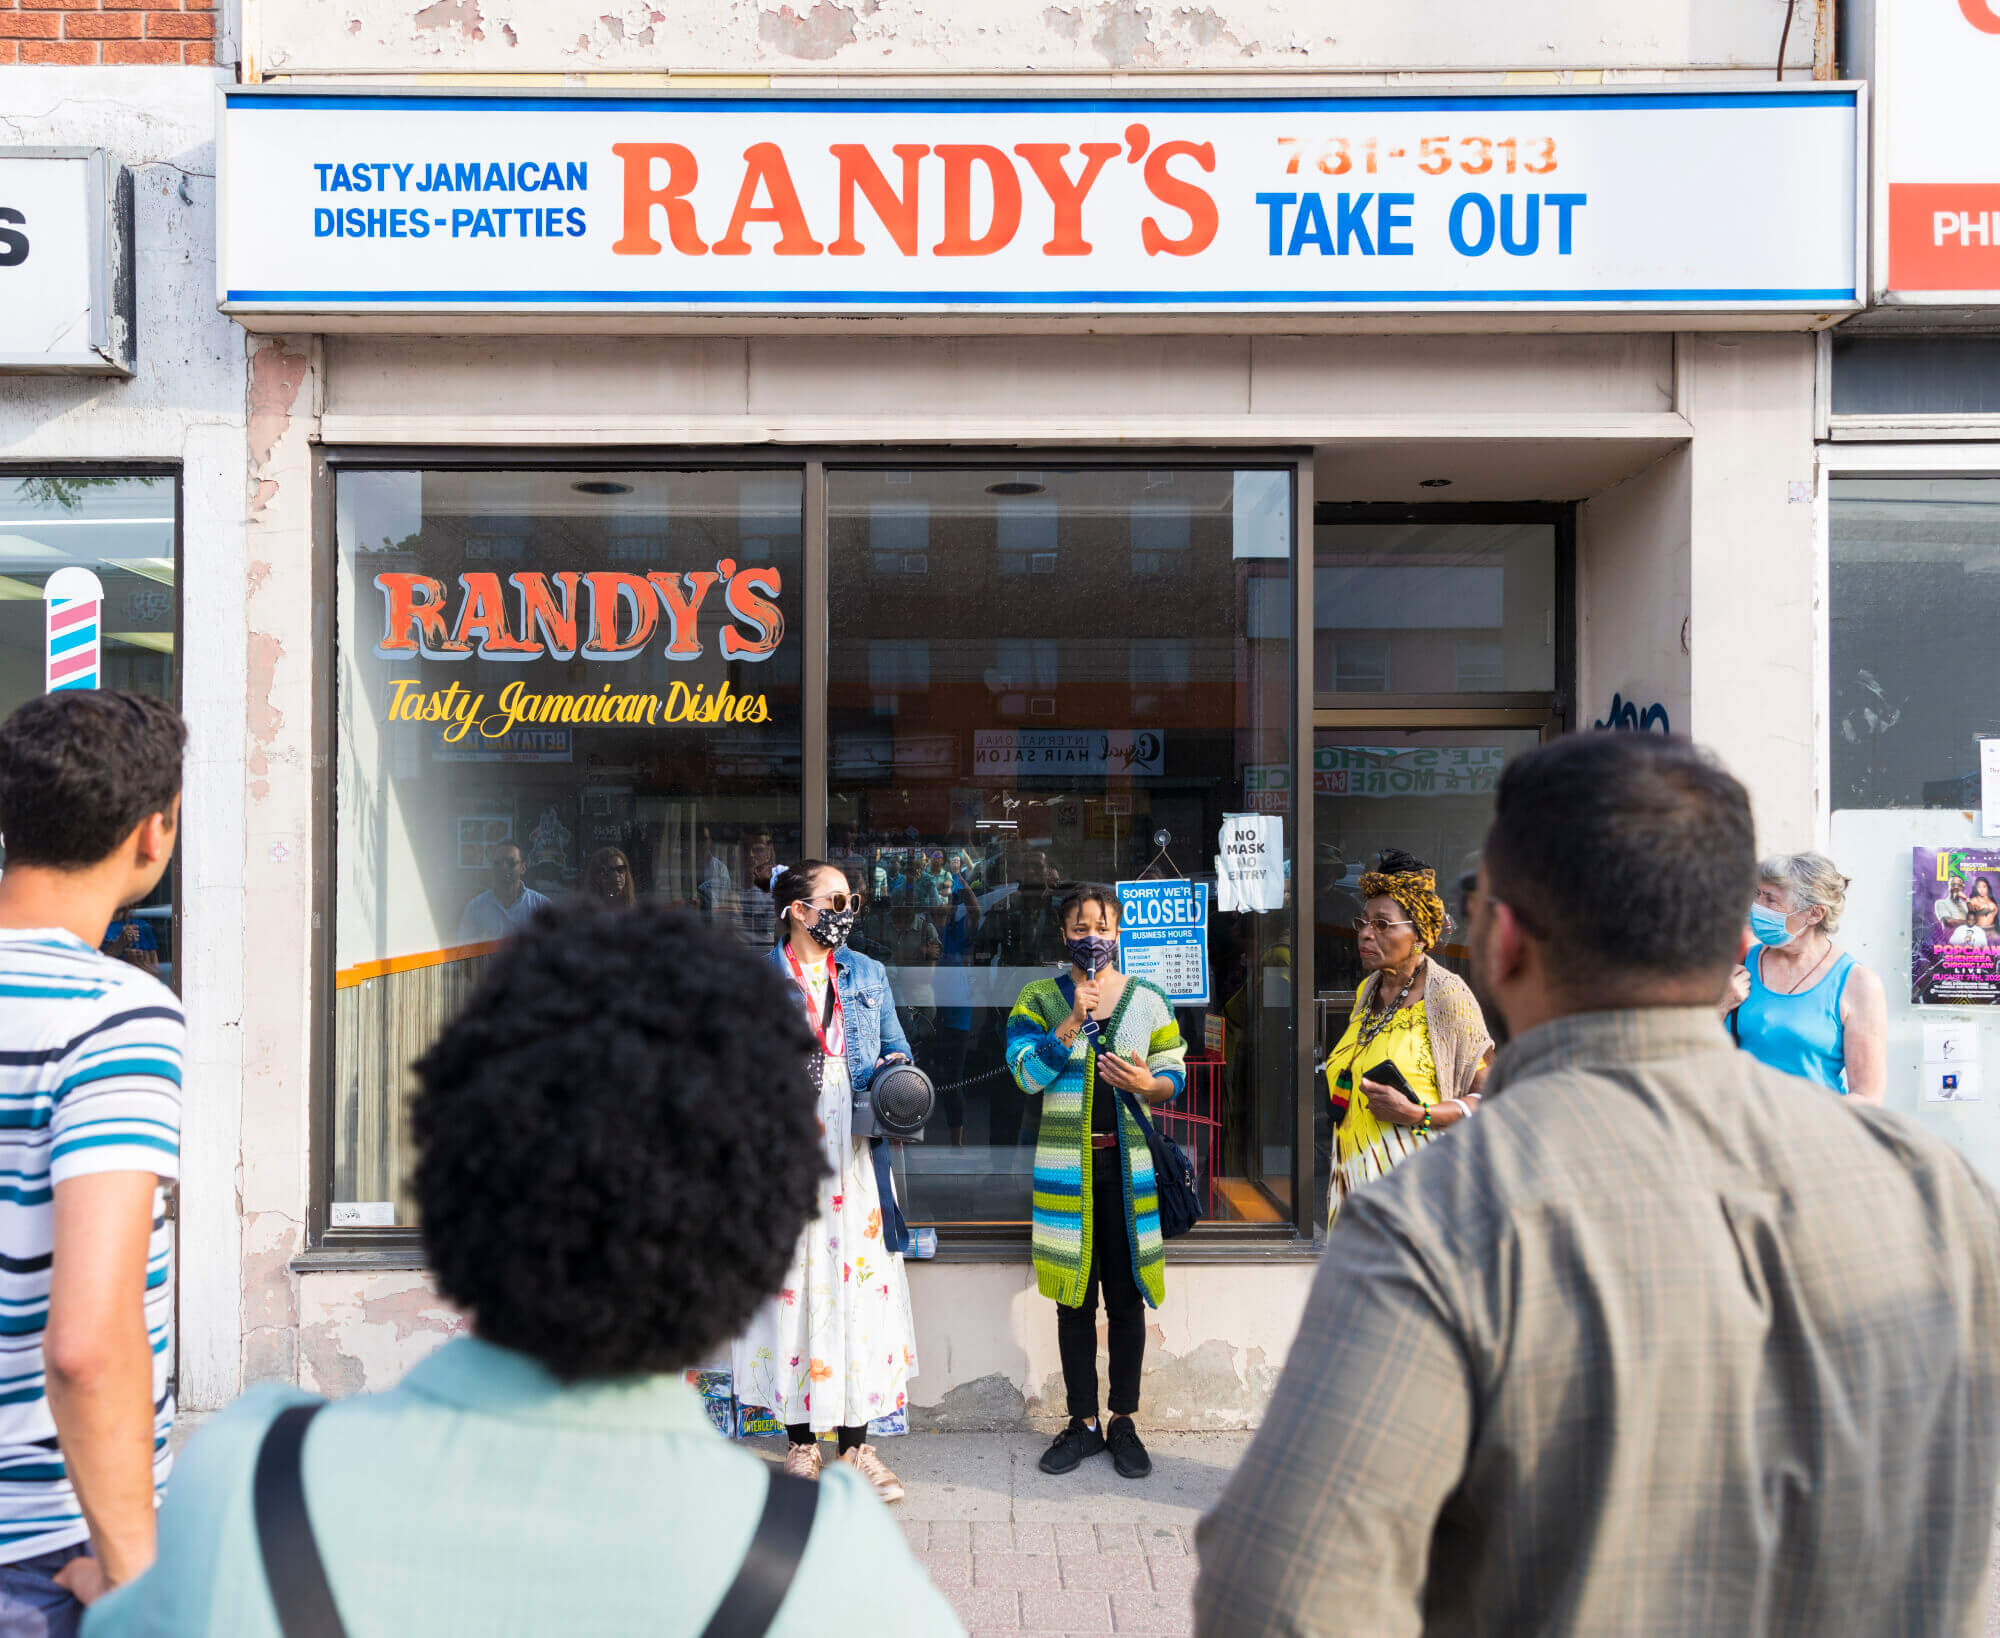 A woman is speaking to a group of people with a microphone and two people are standing beside her in front of a store with glass window panels at the storefront. The store sign above the windows reads 